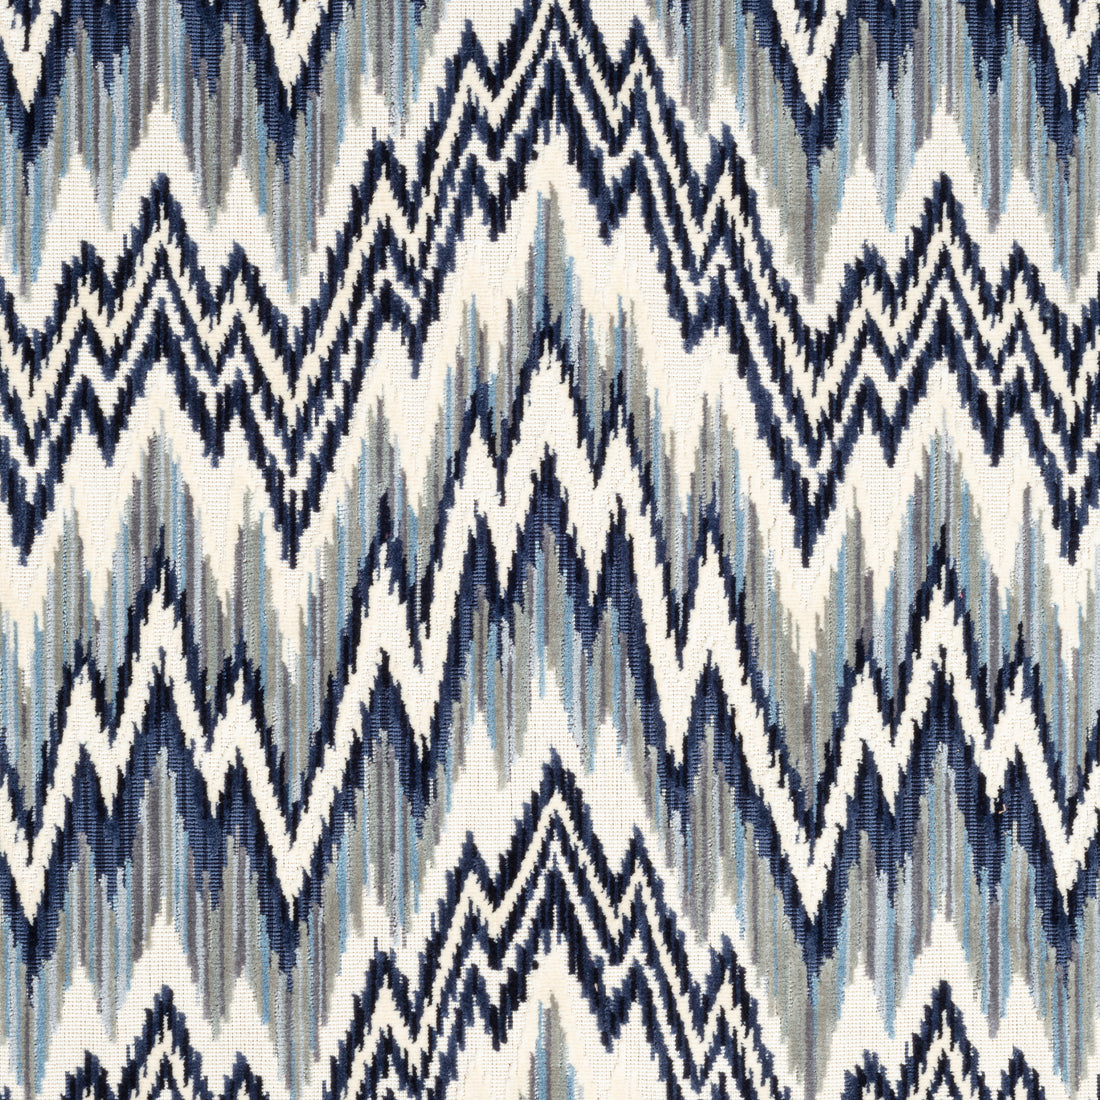 Rhythm Velvet fabric in sterling and navy color - pattern number W72820 - by Thibaut in the Woven Resource 13: Fusion Velvets collection